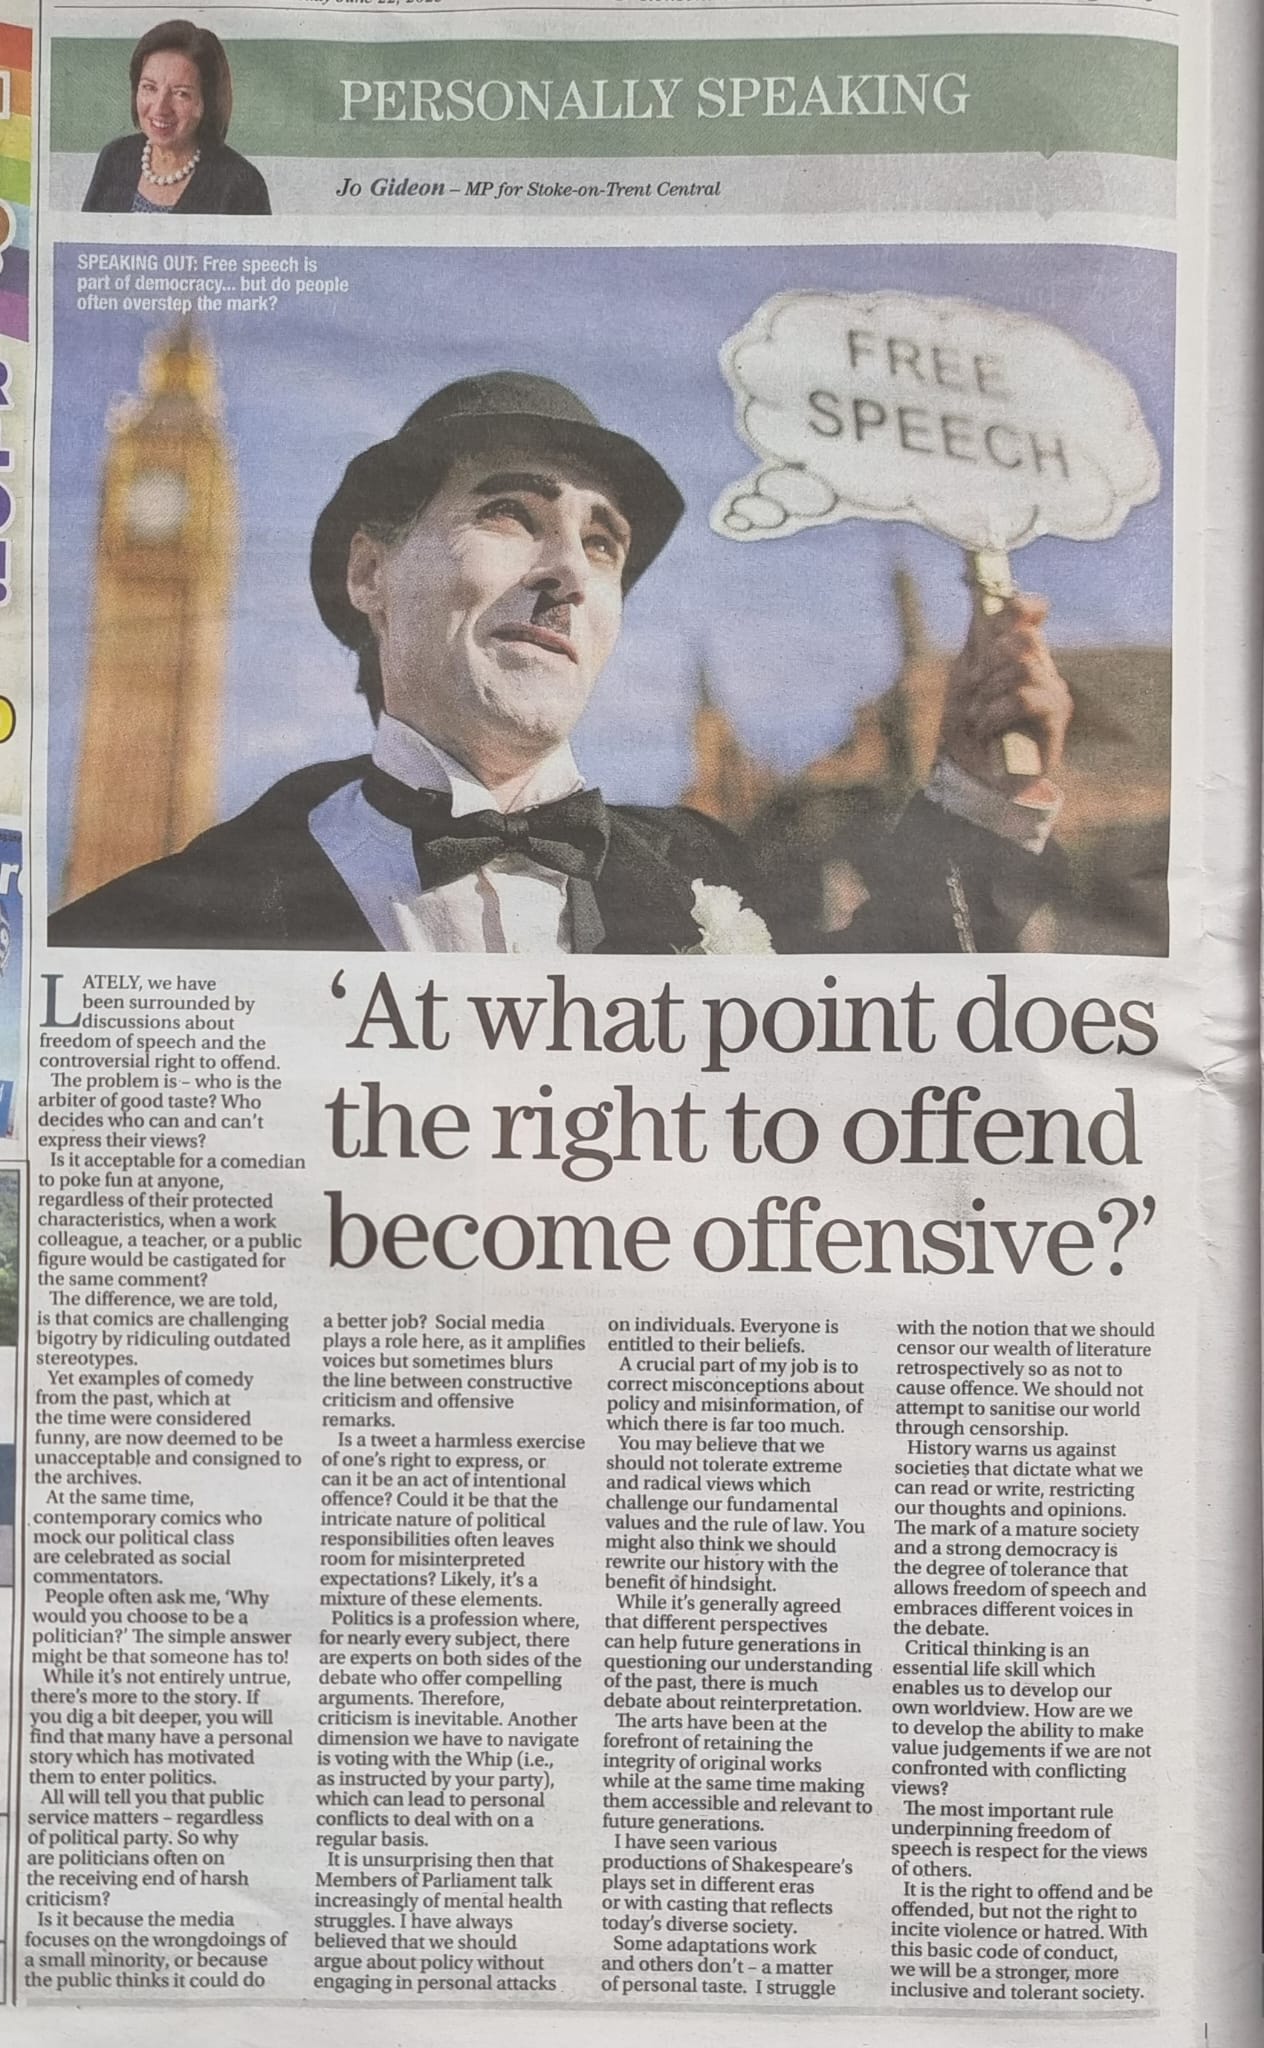 Stoke Sentinel Personally Speaking: 'At what point does the right to offend become offensive?'